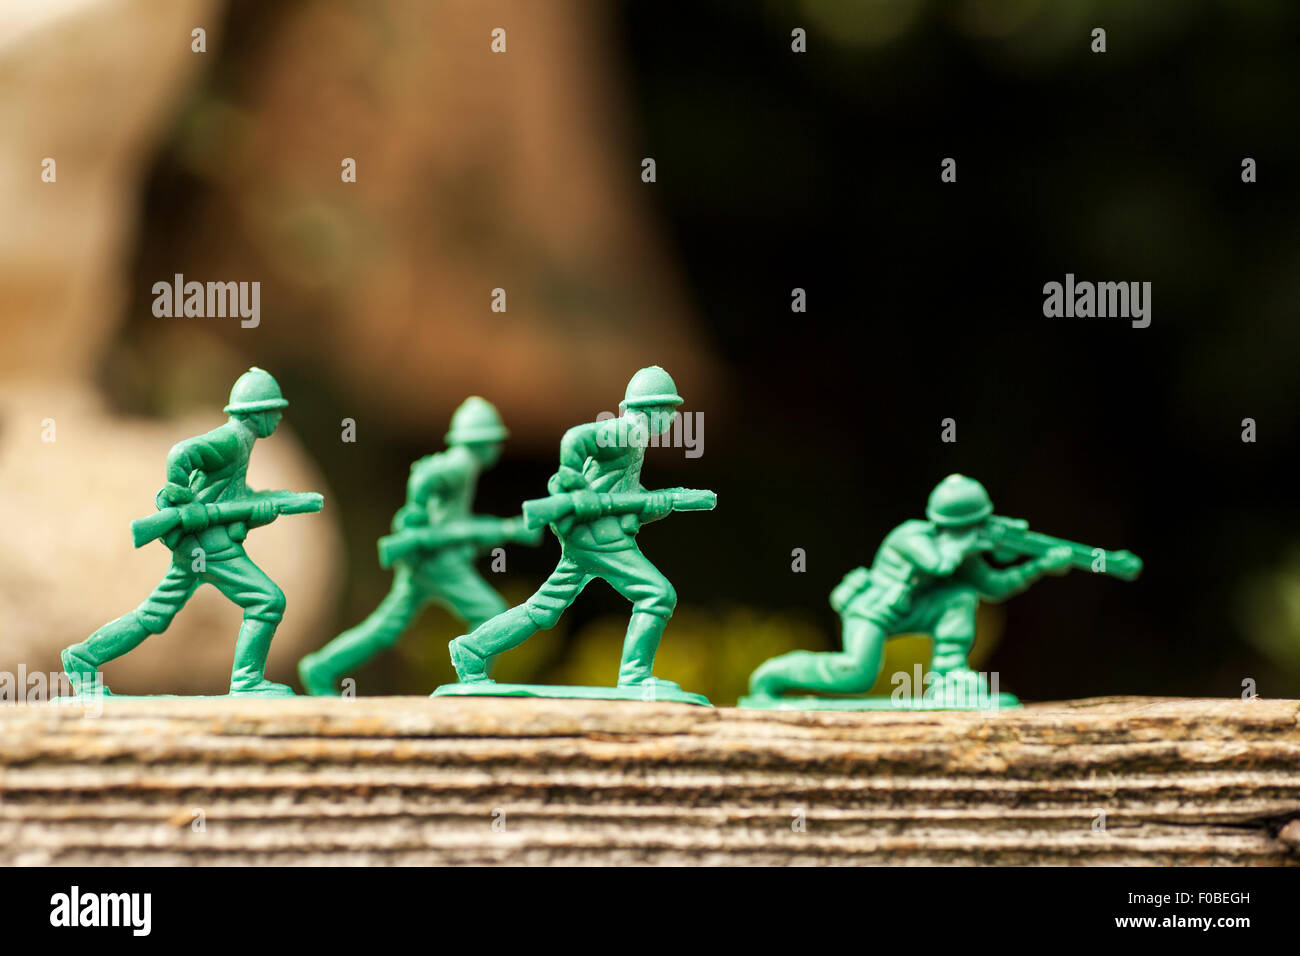 Green plastic toy soldiers/army men on a mission in the back garden surrounded by grass and flowers Stock Photo